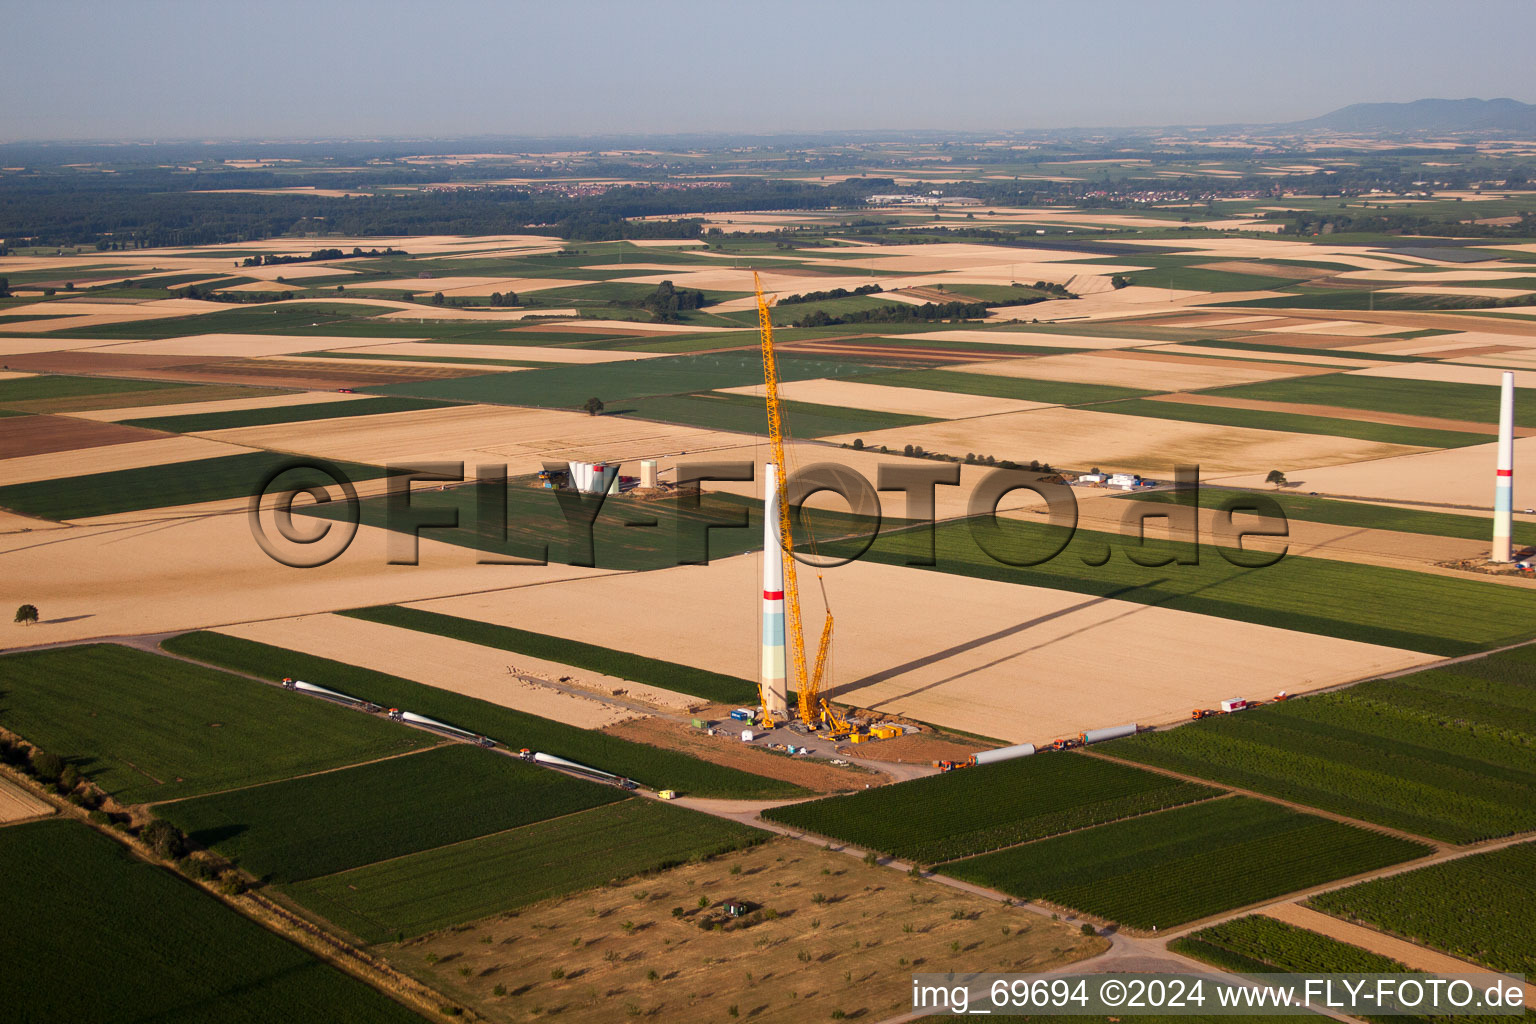 Wind farm construction in Offenbach an der Queich in the state Rhineland-Palatinate, Germany viewn from the air